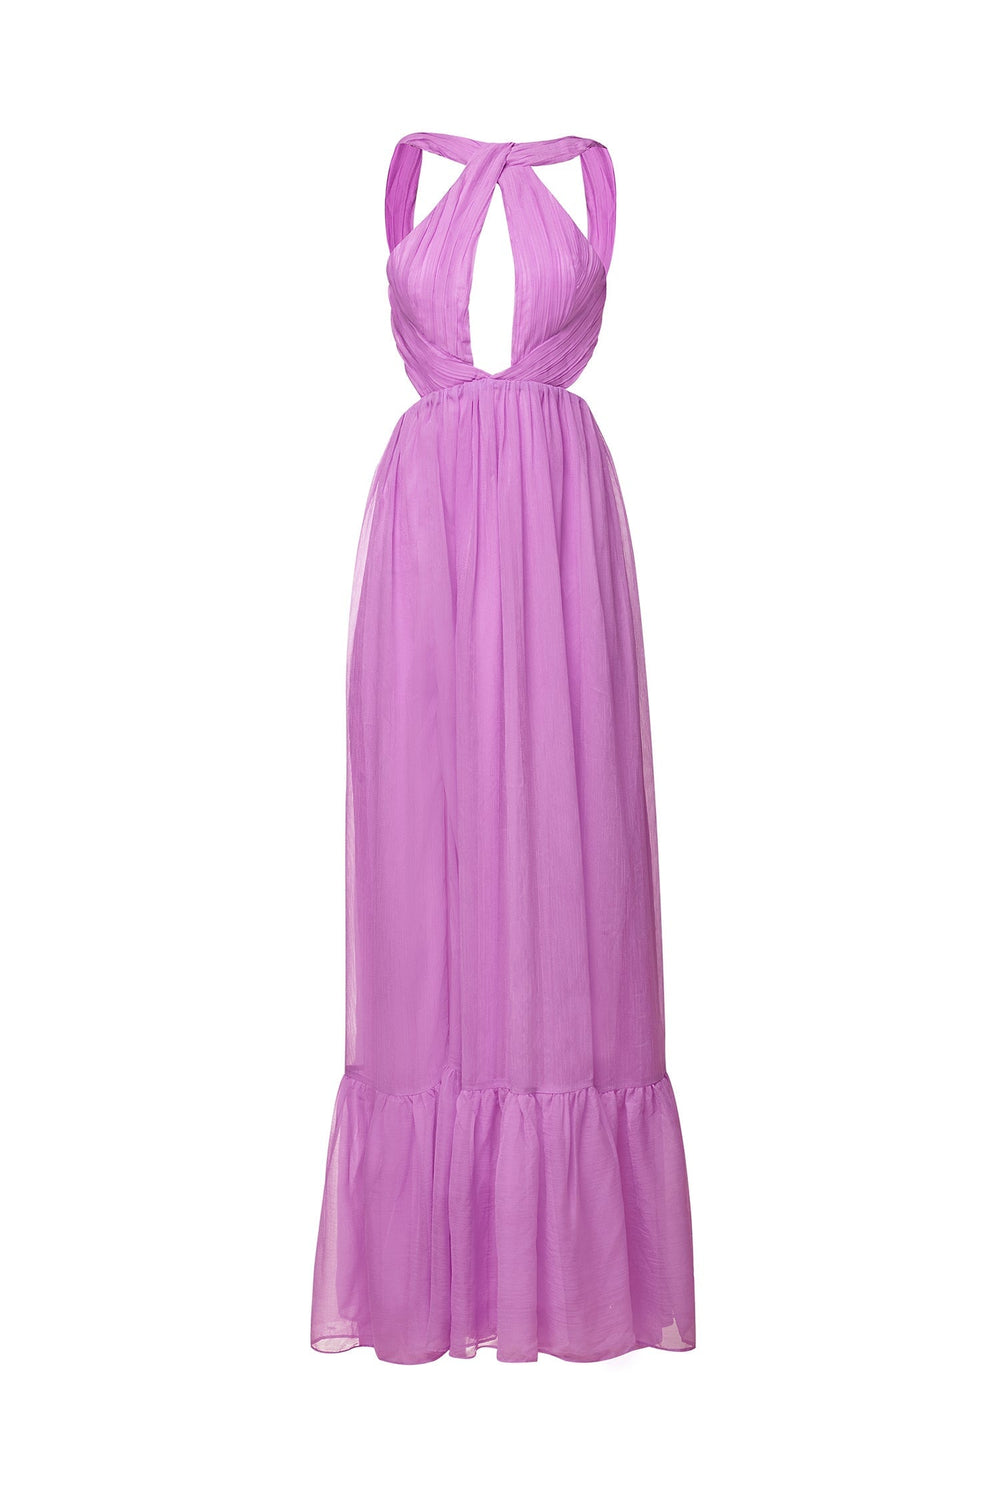 Gwen - Lilac Chiffon Dress with Open Back and Open Neckline